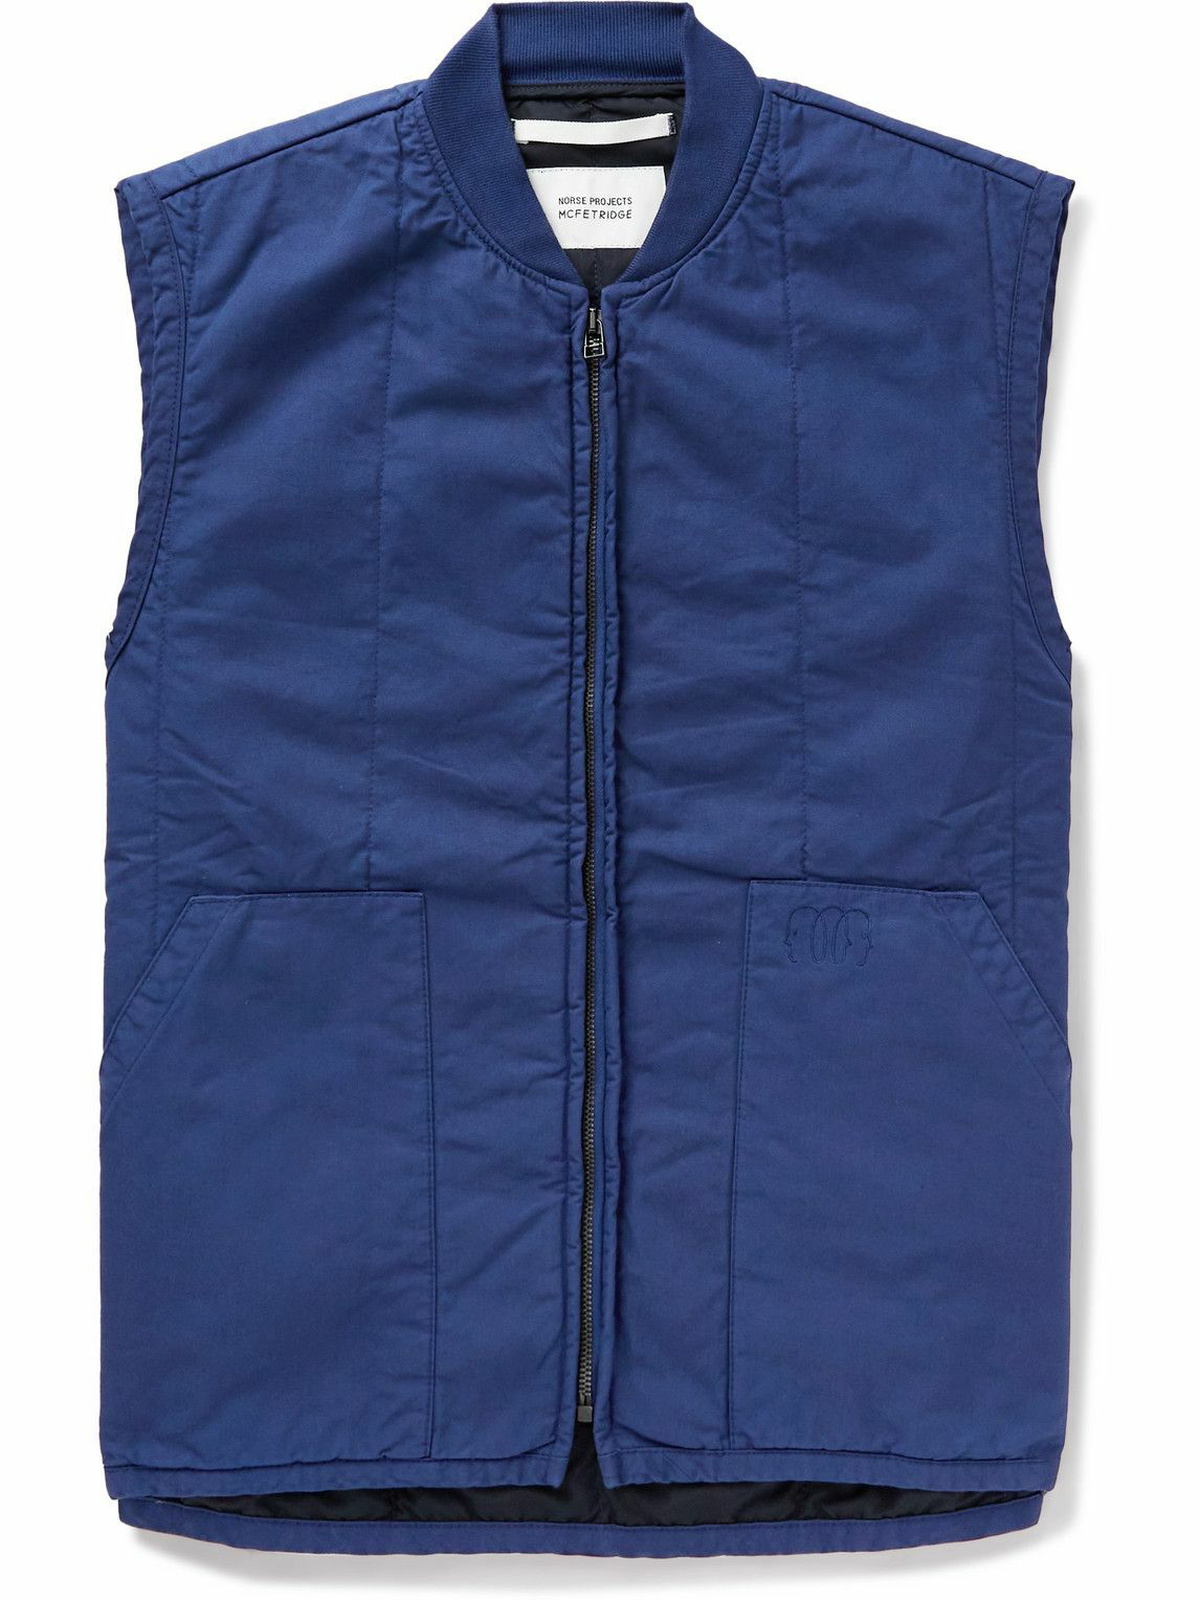 Norse Projects - Geoff McFetridge Peter Embroidered Cotton-Twill Gilet ...